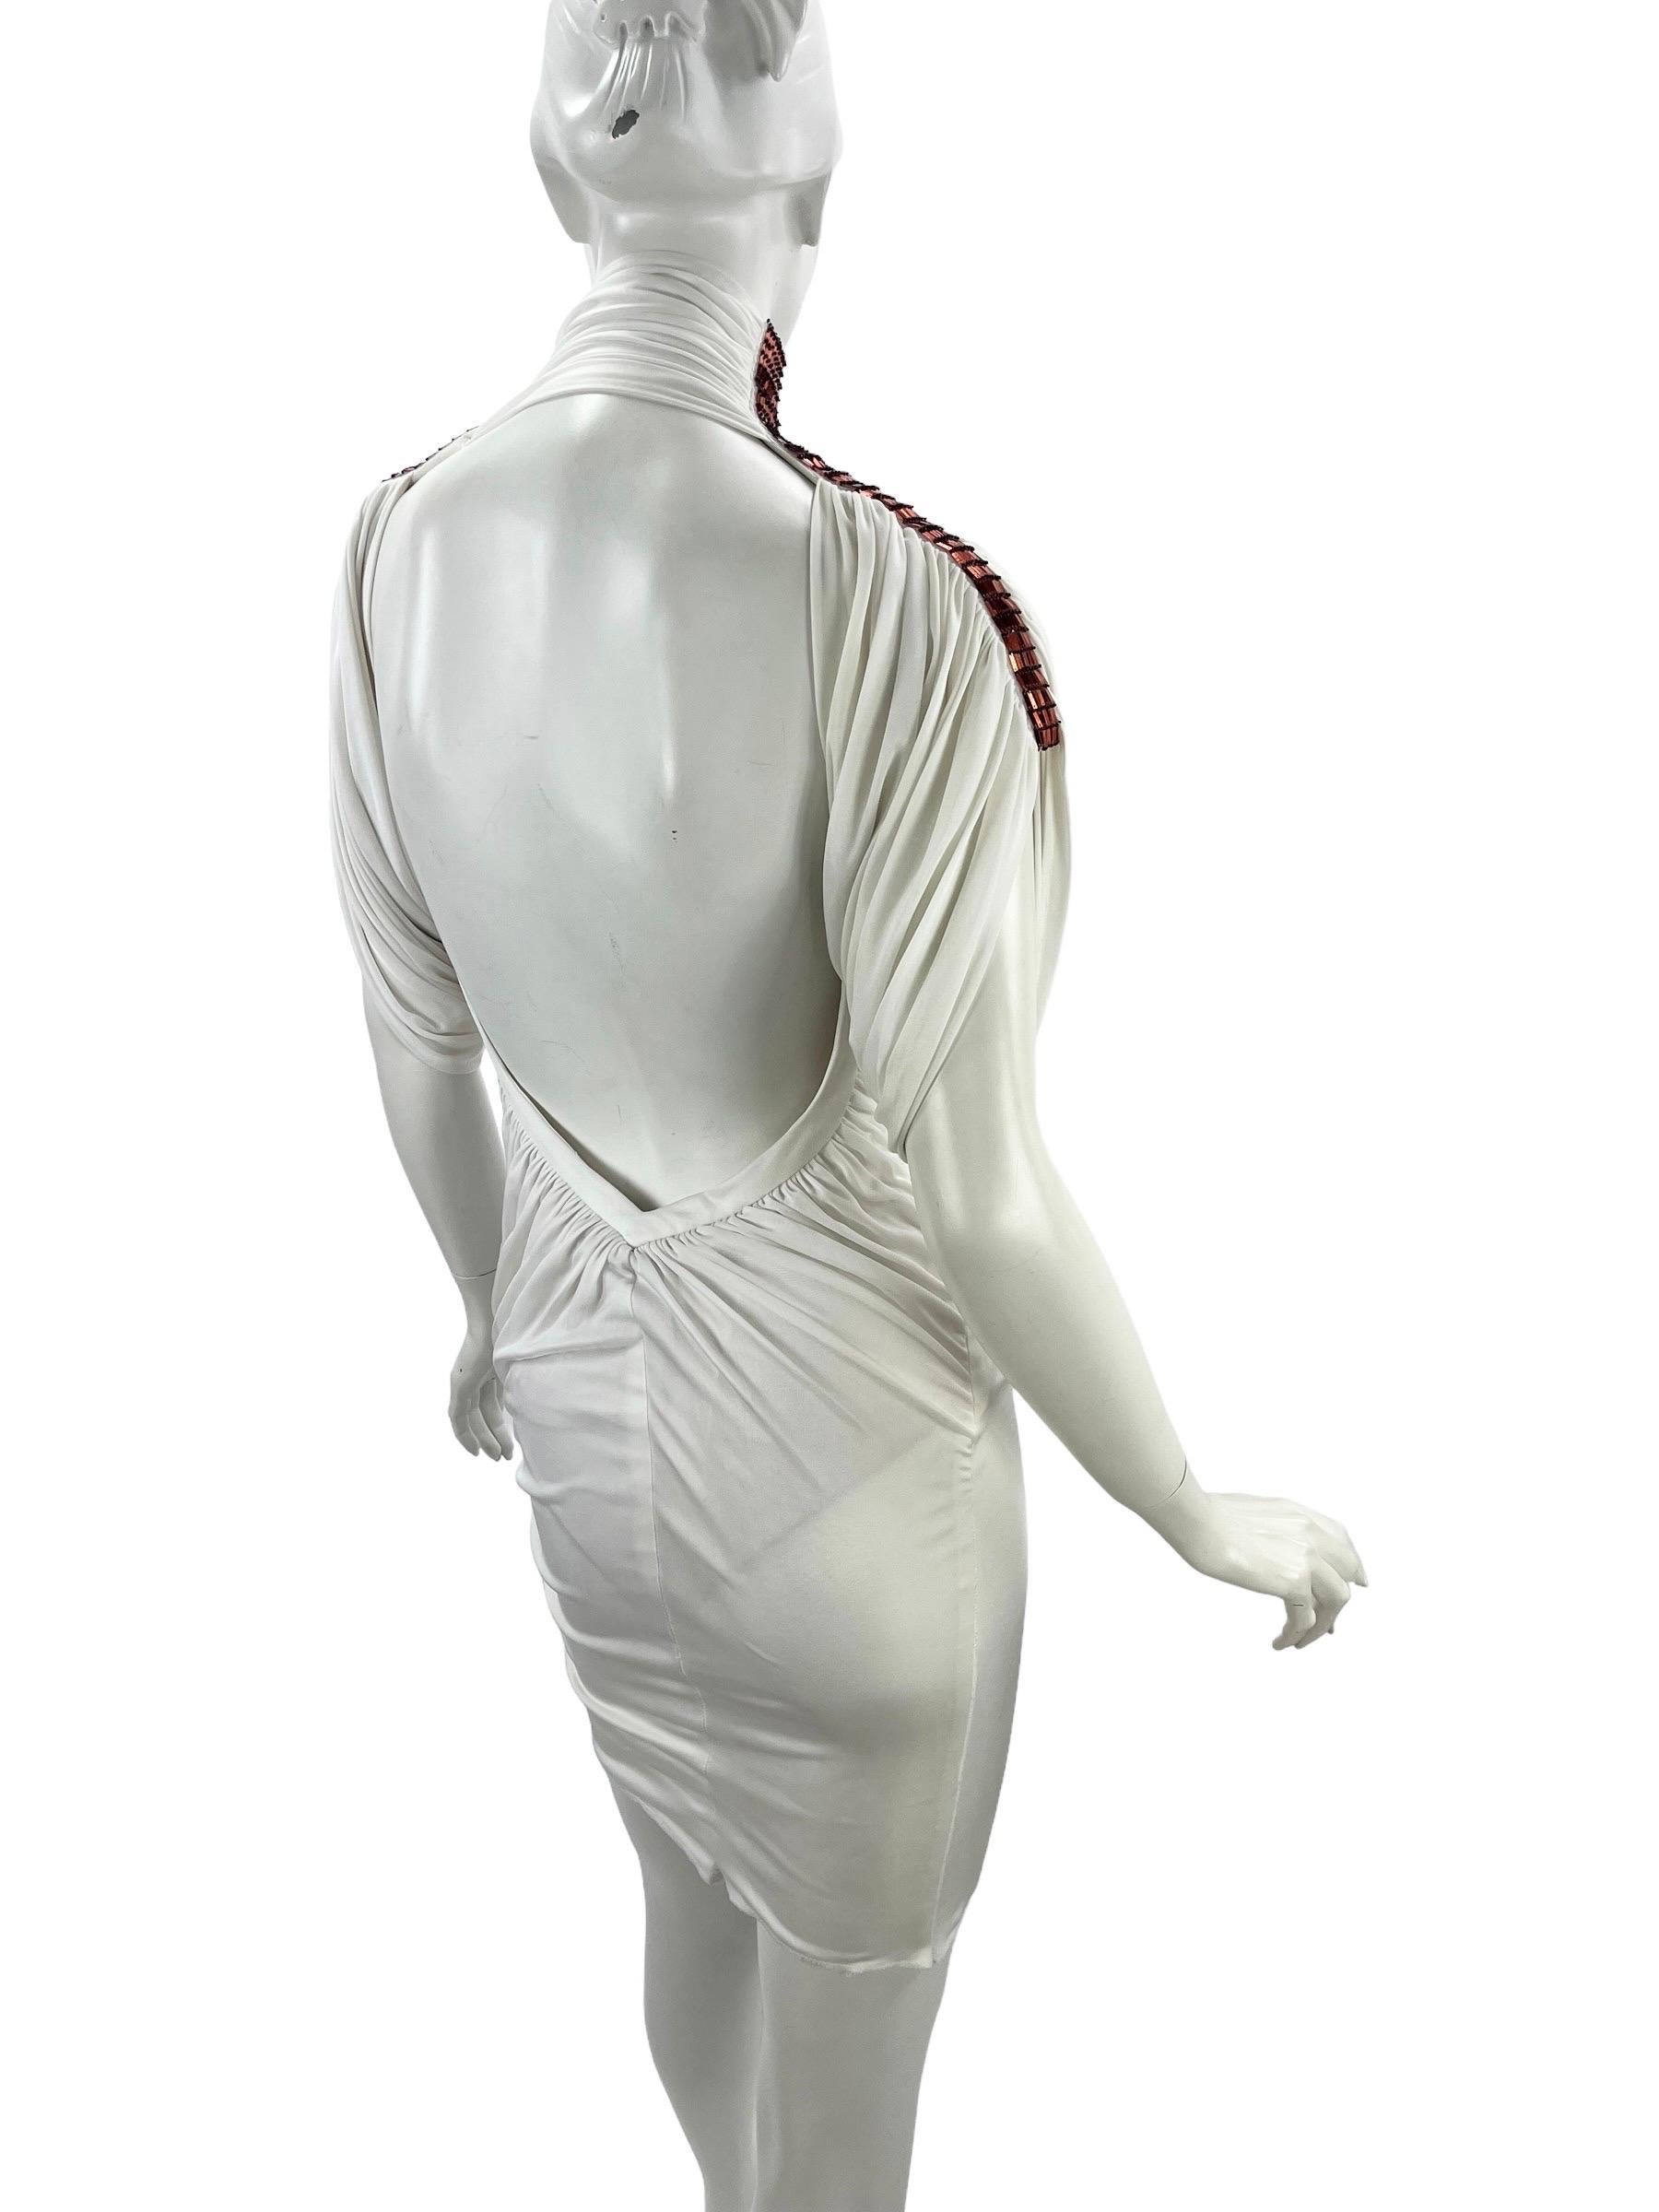 S/S 2001 Vintage Gianni Versace Couture Embellished White Turtleneck Dress It 38 In Excellent Condition For Sale In Montgomery, TX